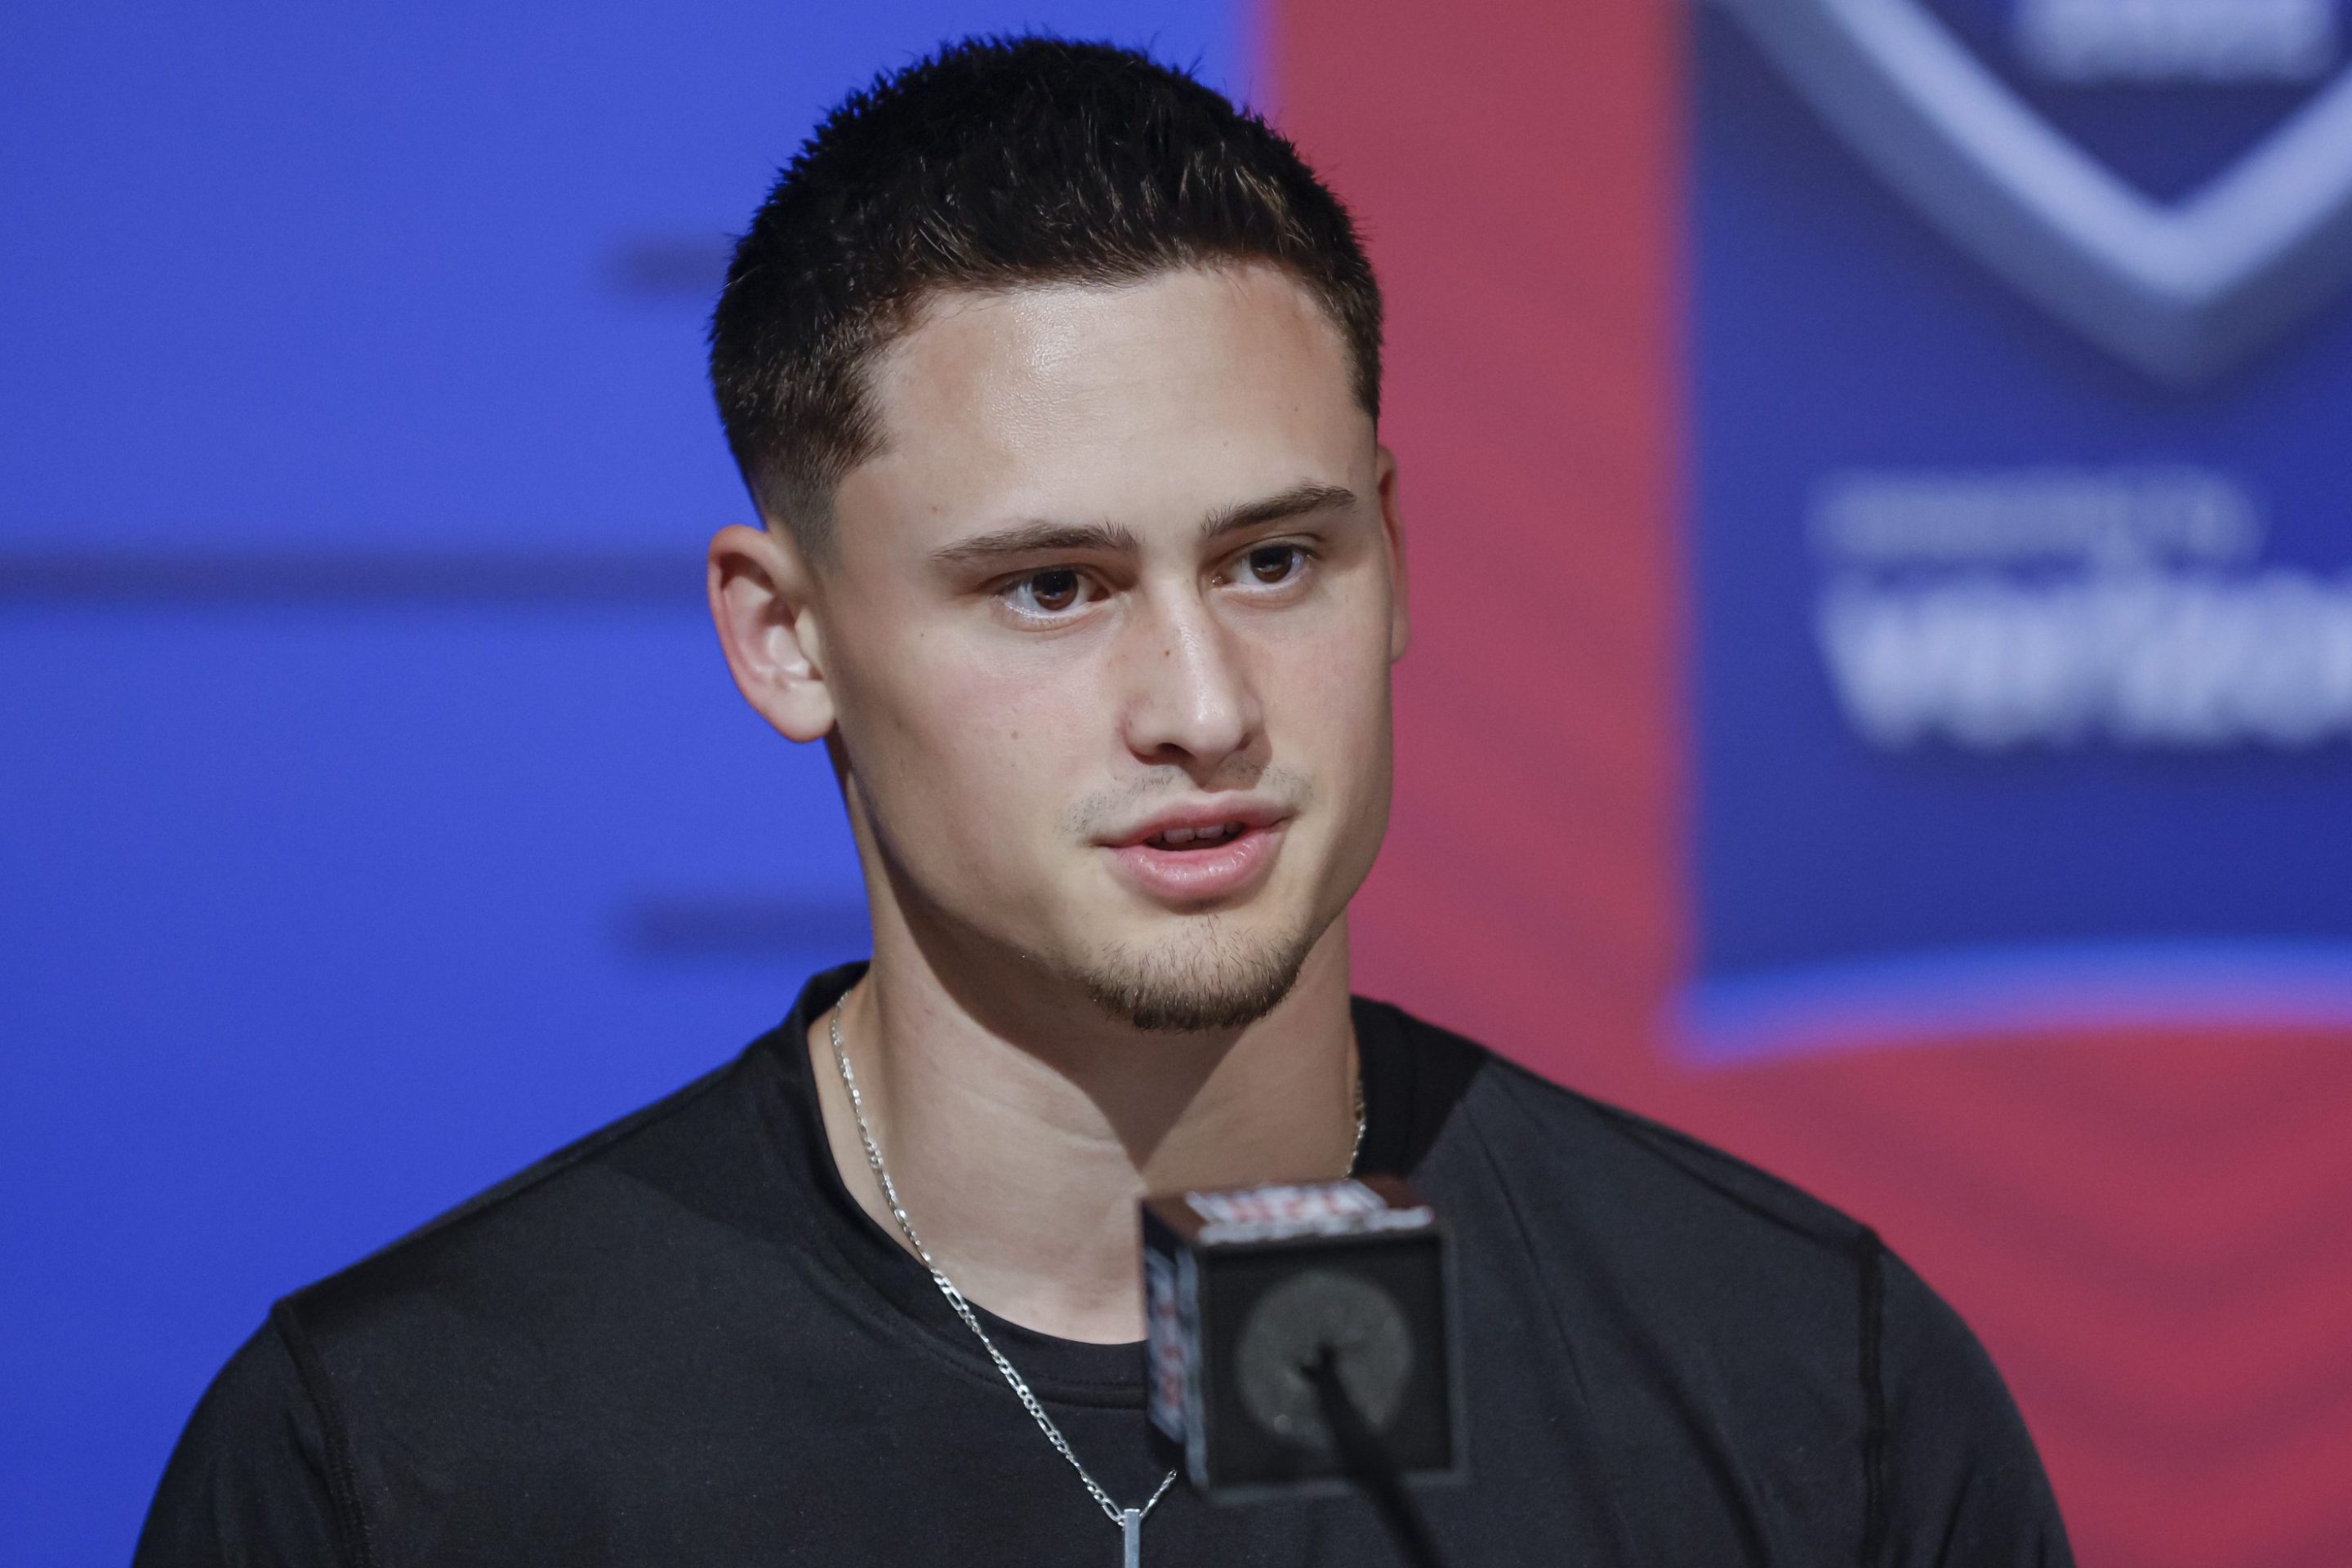 Matt Araiza of the San Diego State Aztecs speaks to reporters during the NFL Draft Combine at the Indiana Convention Center on March 5, 2022 in Indianapolis, Indiana.